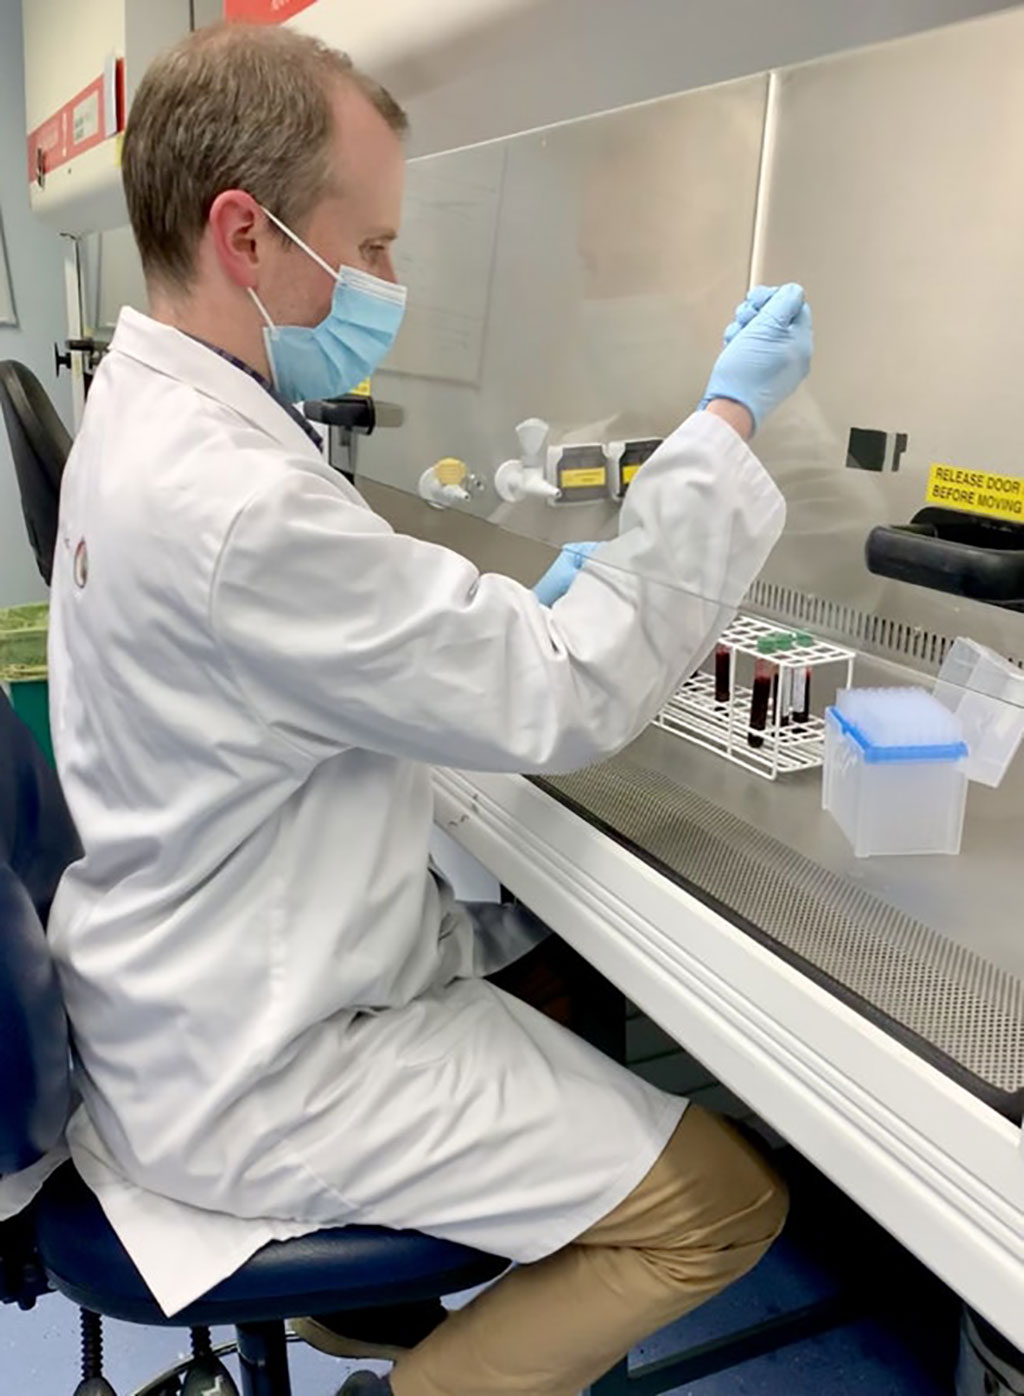 Image: Dr. Martin Scurr carrying out the test (Photo courtesy of Cardiff University)